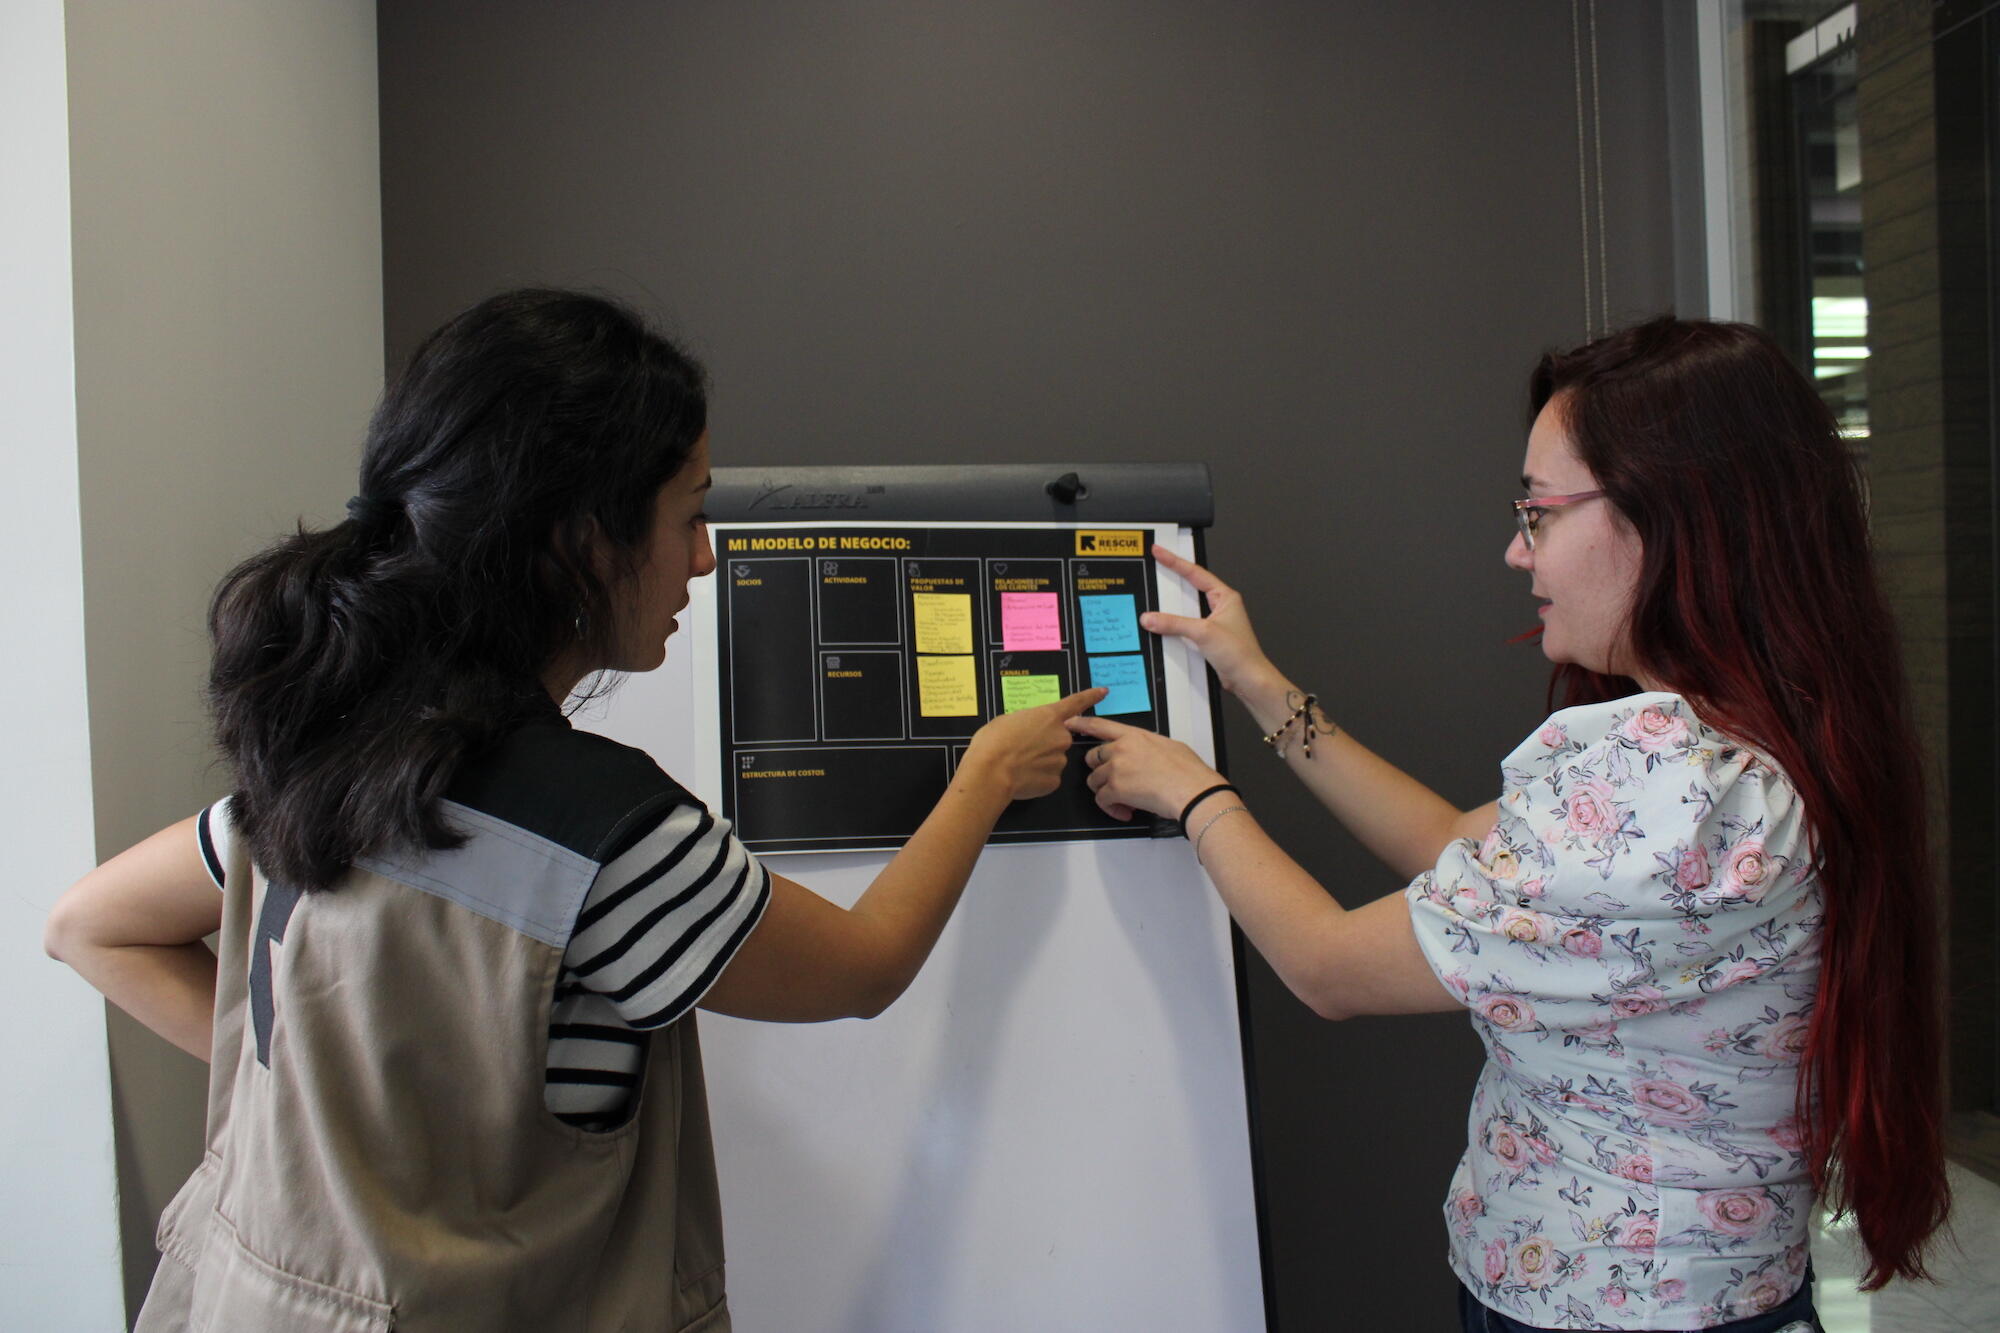 Two women stand in front of a white board with colored sticky notes.